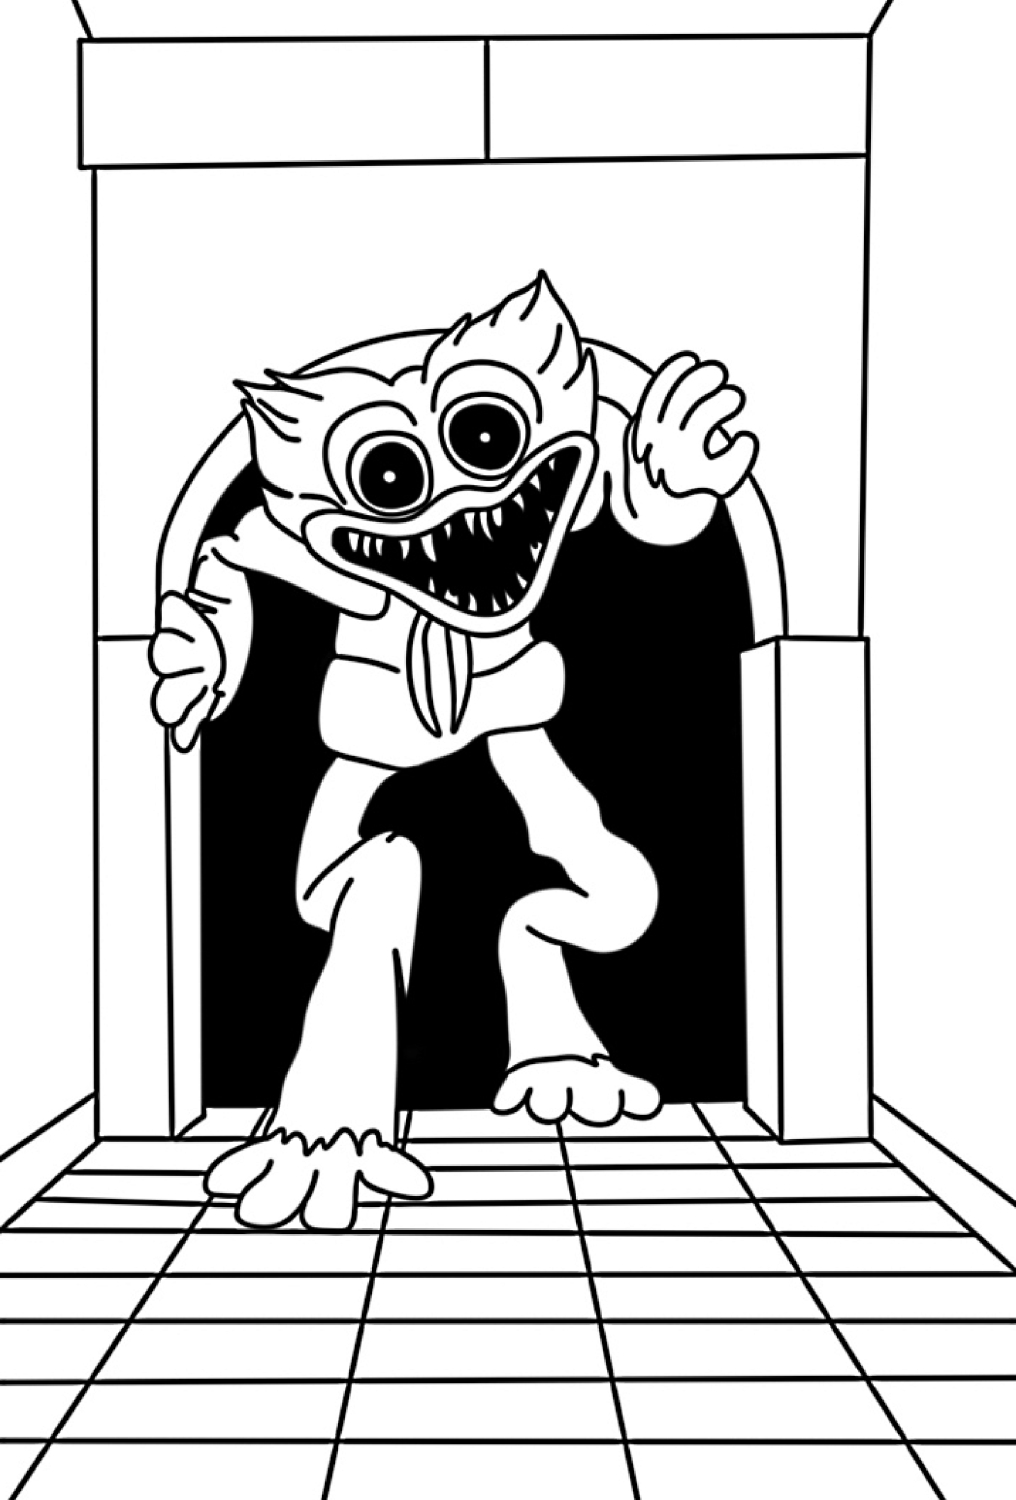 Huggy Wuggy 04 Huggy Wuggy coloring page to print and coloring